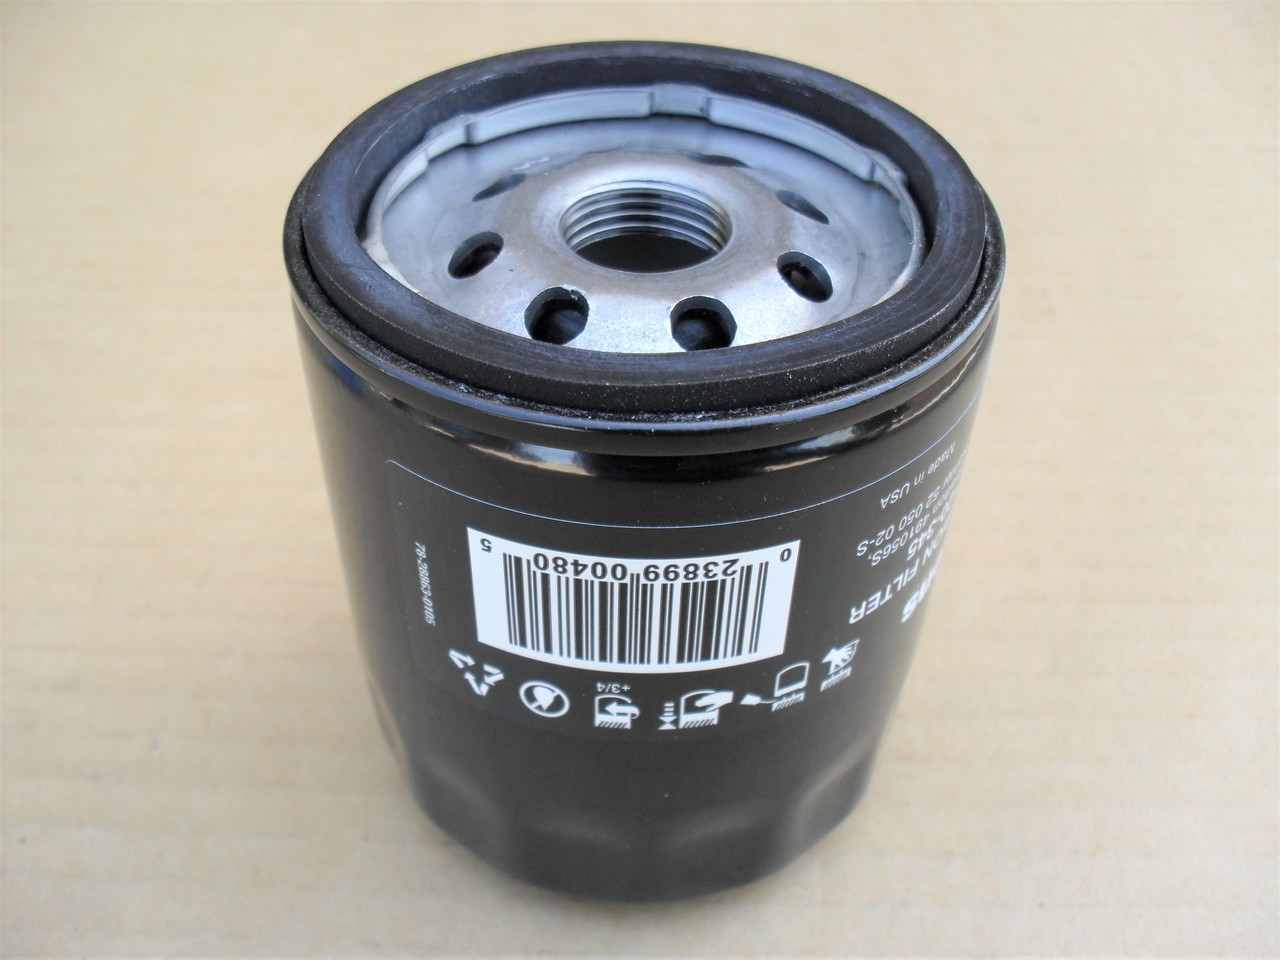 Hydro Transmission Oil Filter for Simplicity 1650954 1650954SM 171439 171439SM Sunstrand Hydro units